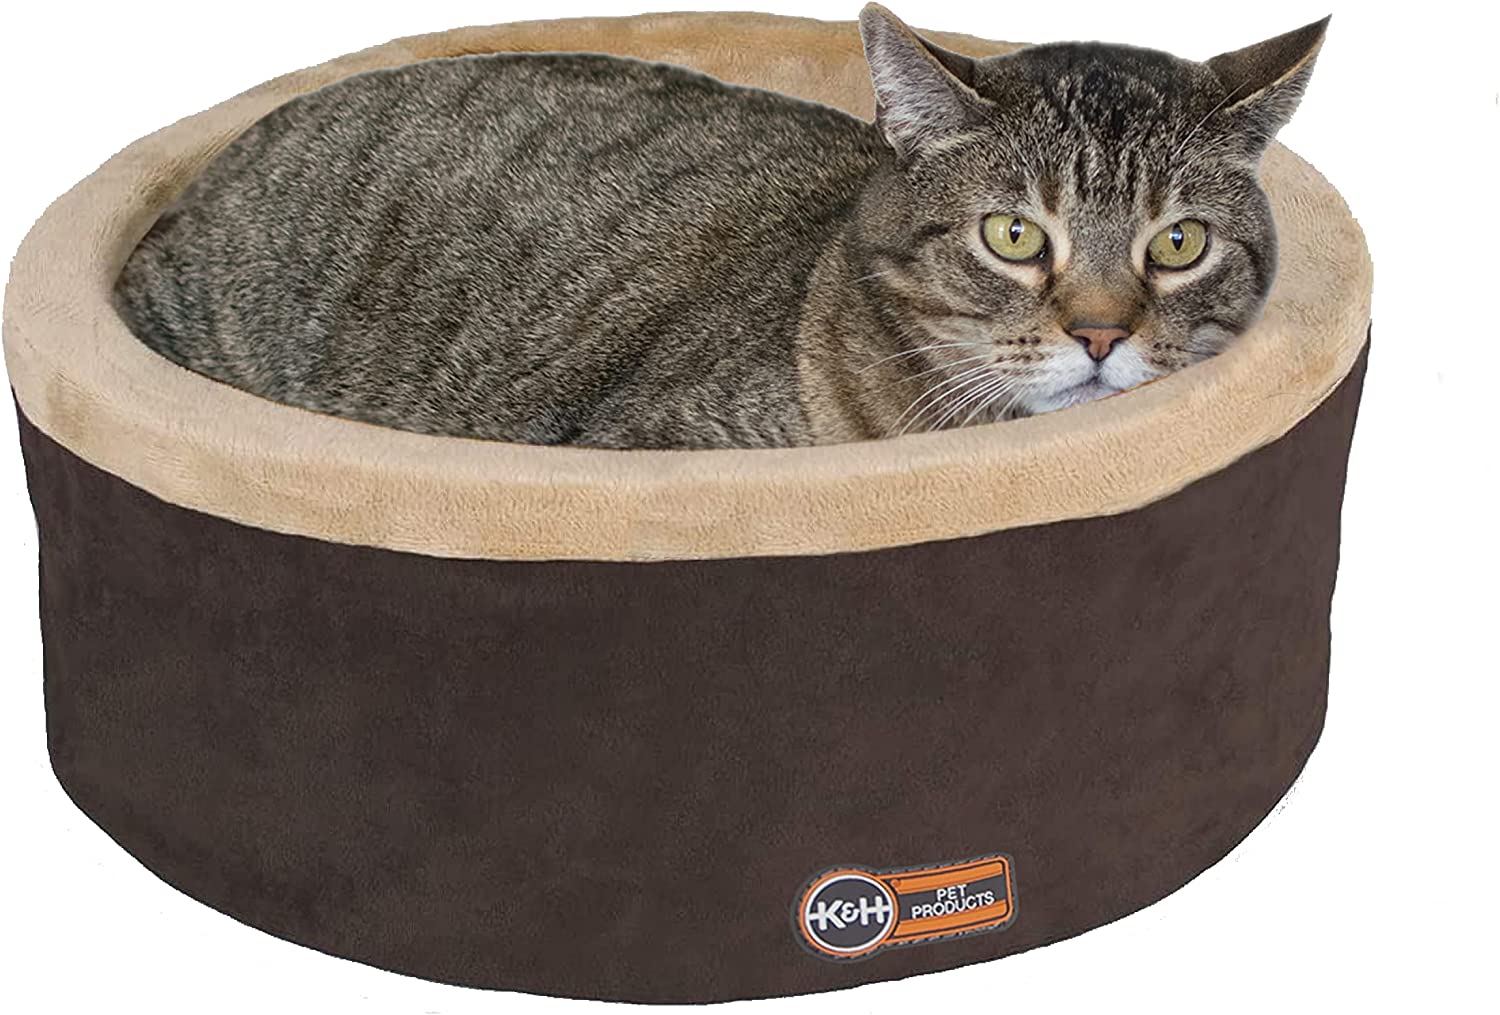 2. K&H Pet Products Thermo-Kitty Bed Heated